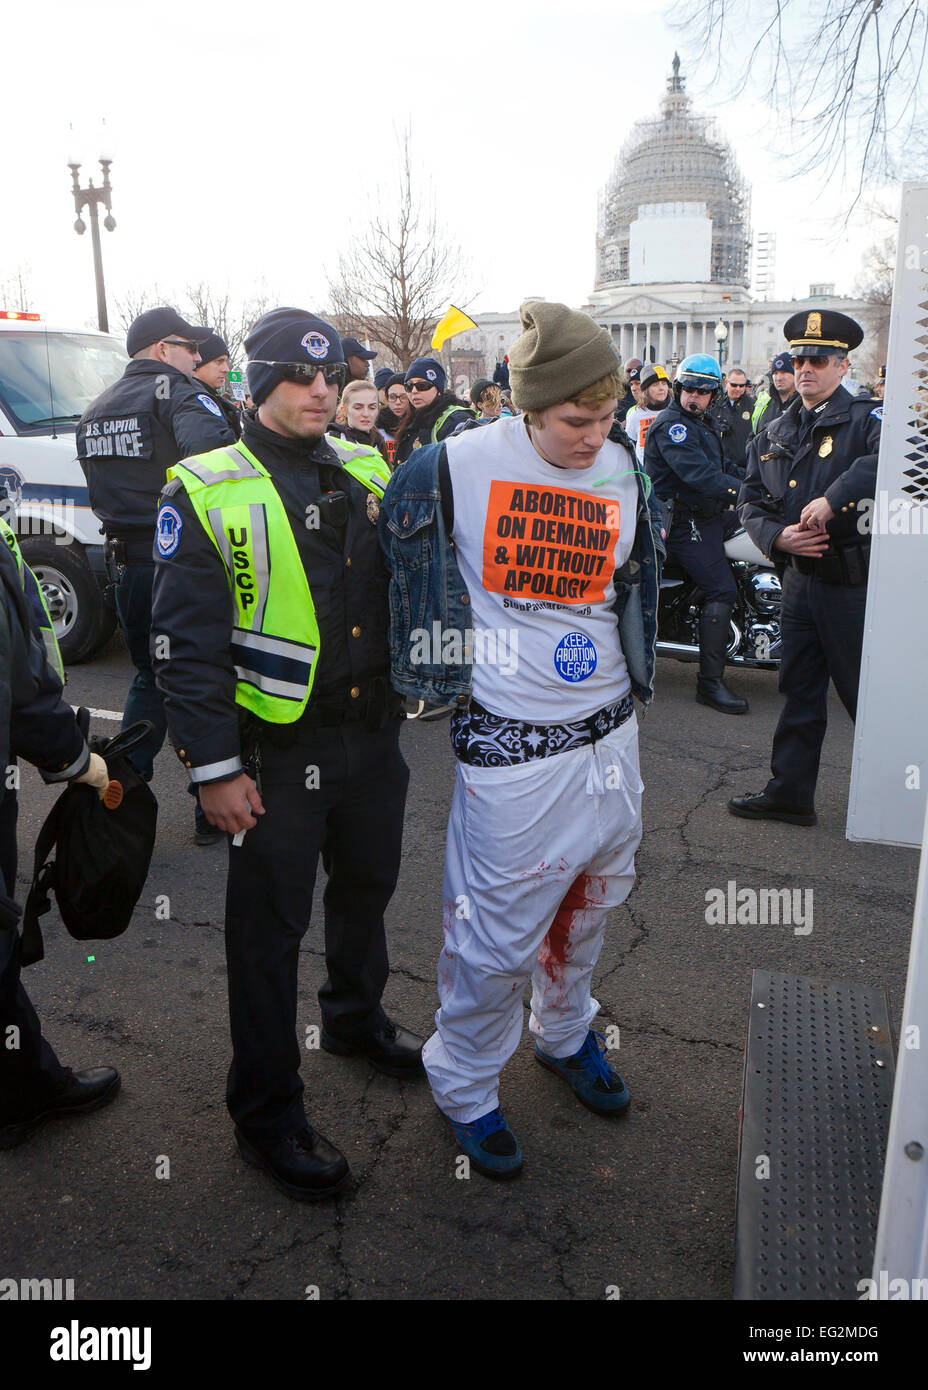 Pro-Choice activist arrested for civil disobedience during Pro-Life march - January 22, 2015, Washington, DC USA Stock Photo